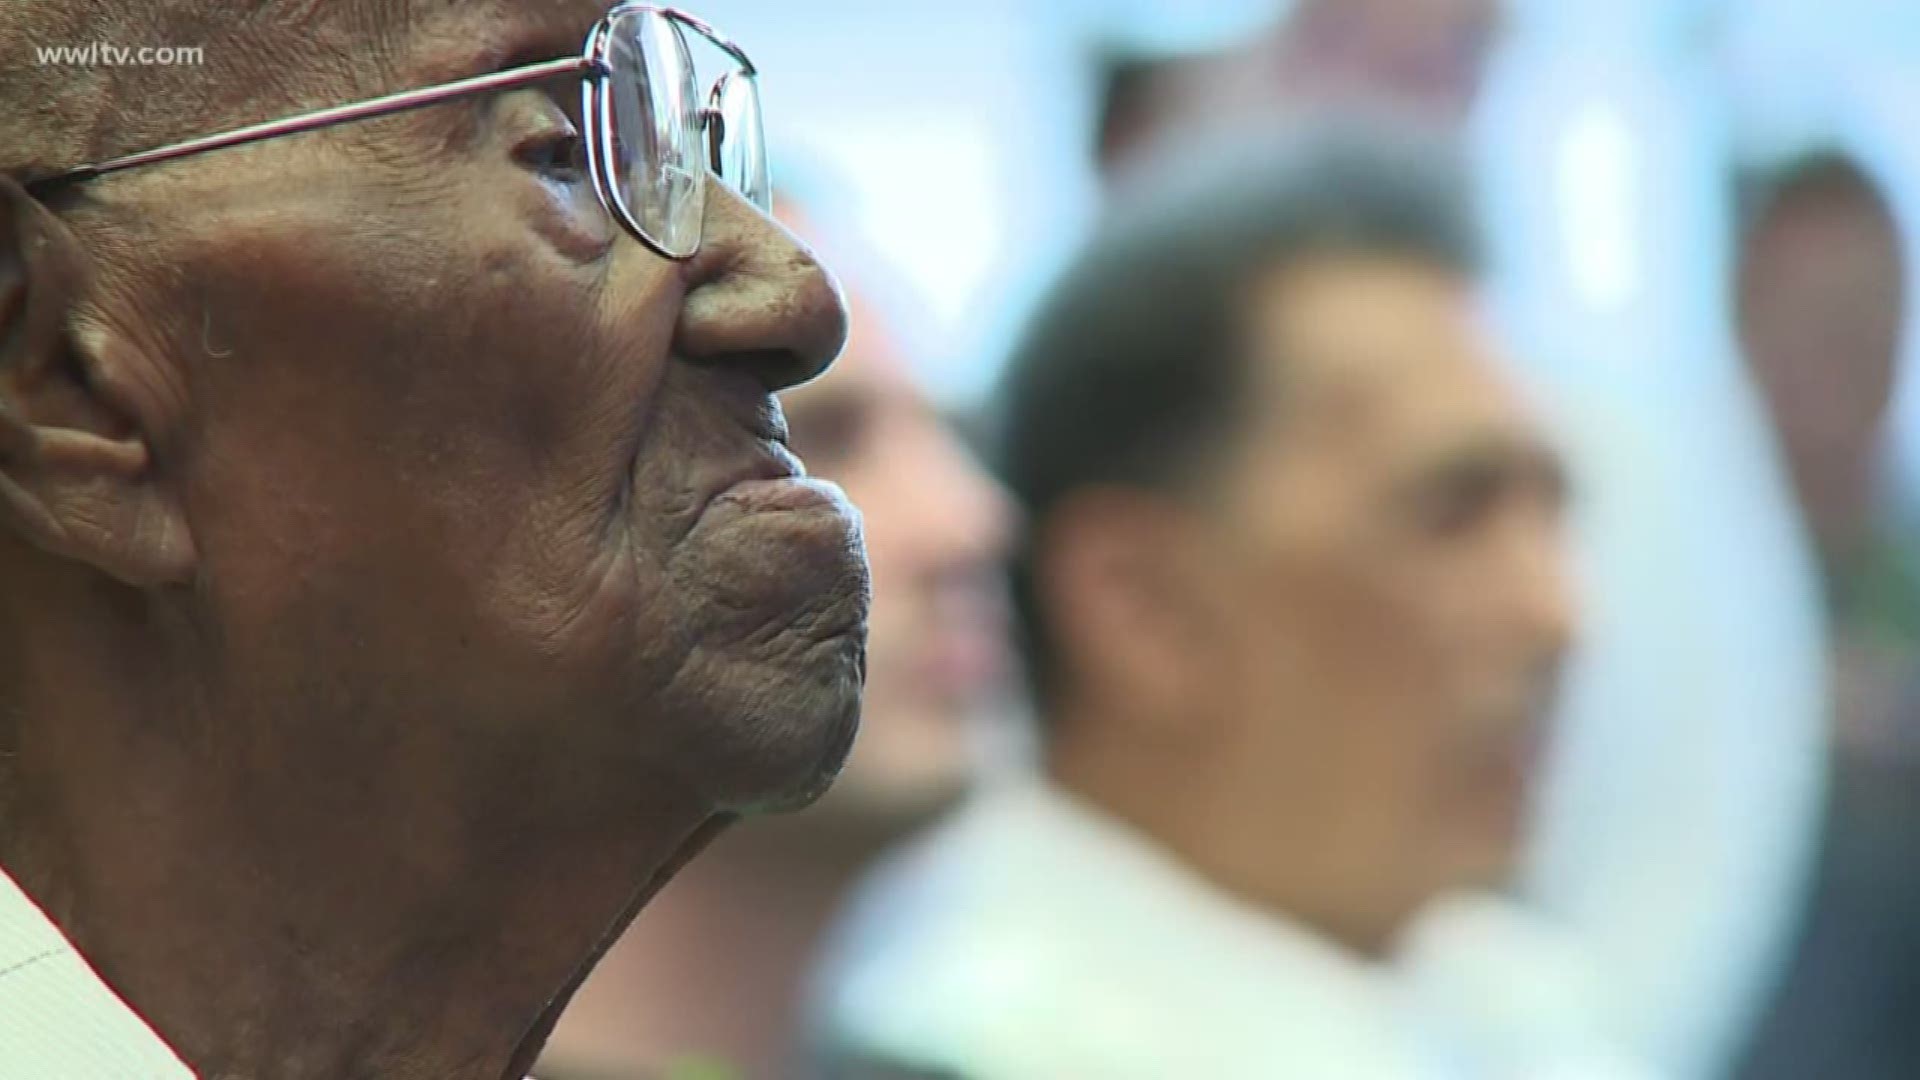 He celebrated his 110th birthday at the National World War II Museum